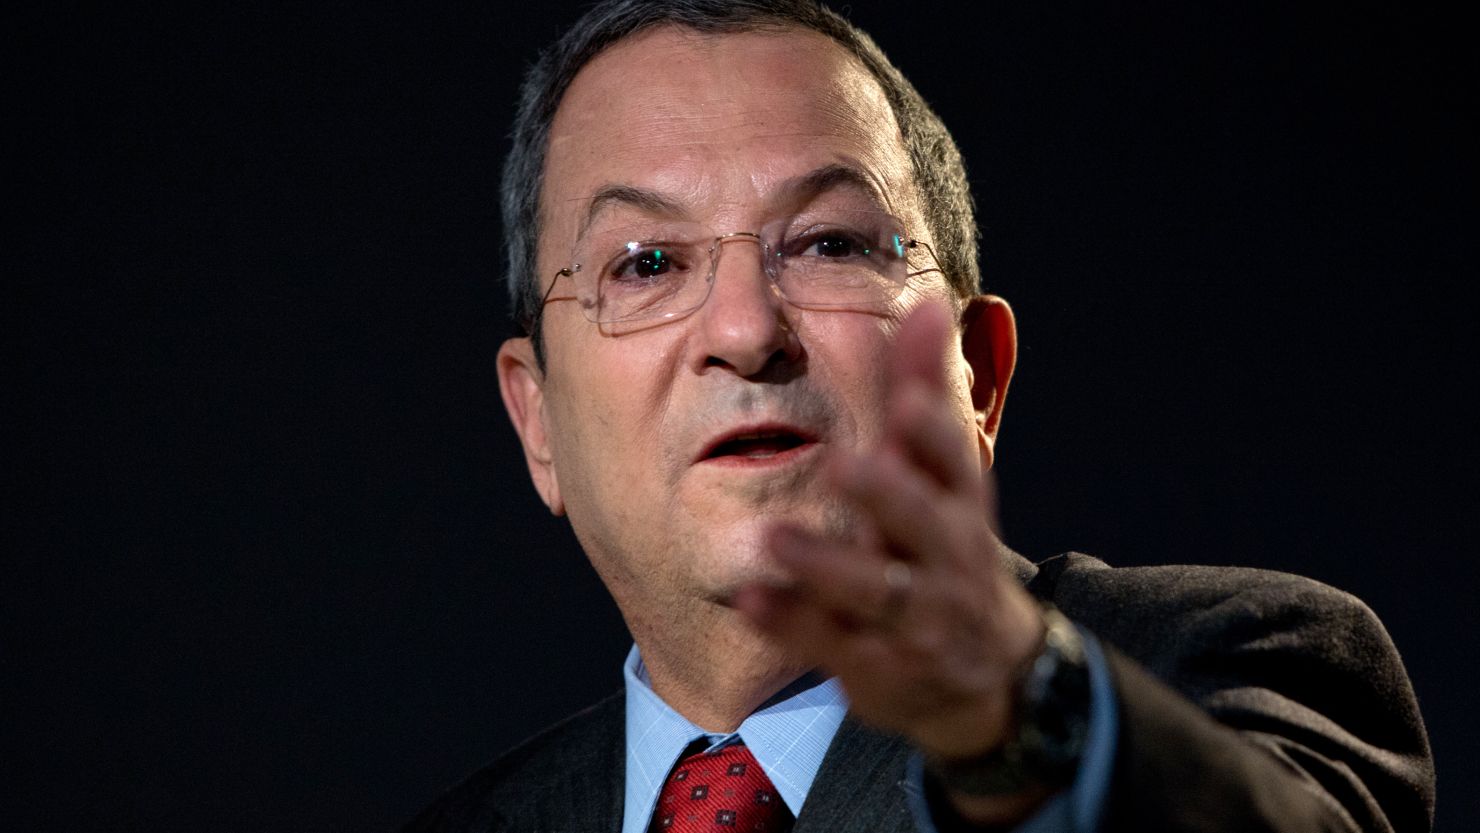 Ehud Barak's remarks Sunday appeared to be the first public comment by an Israeli official on the incident.